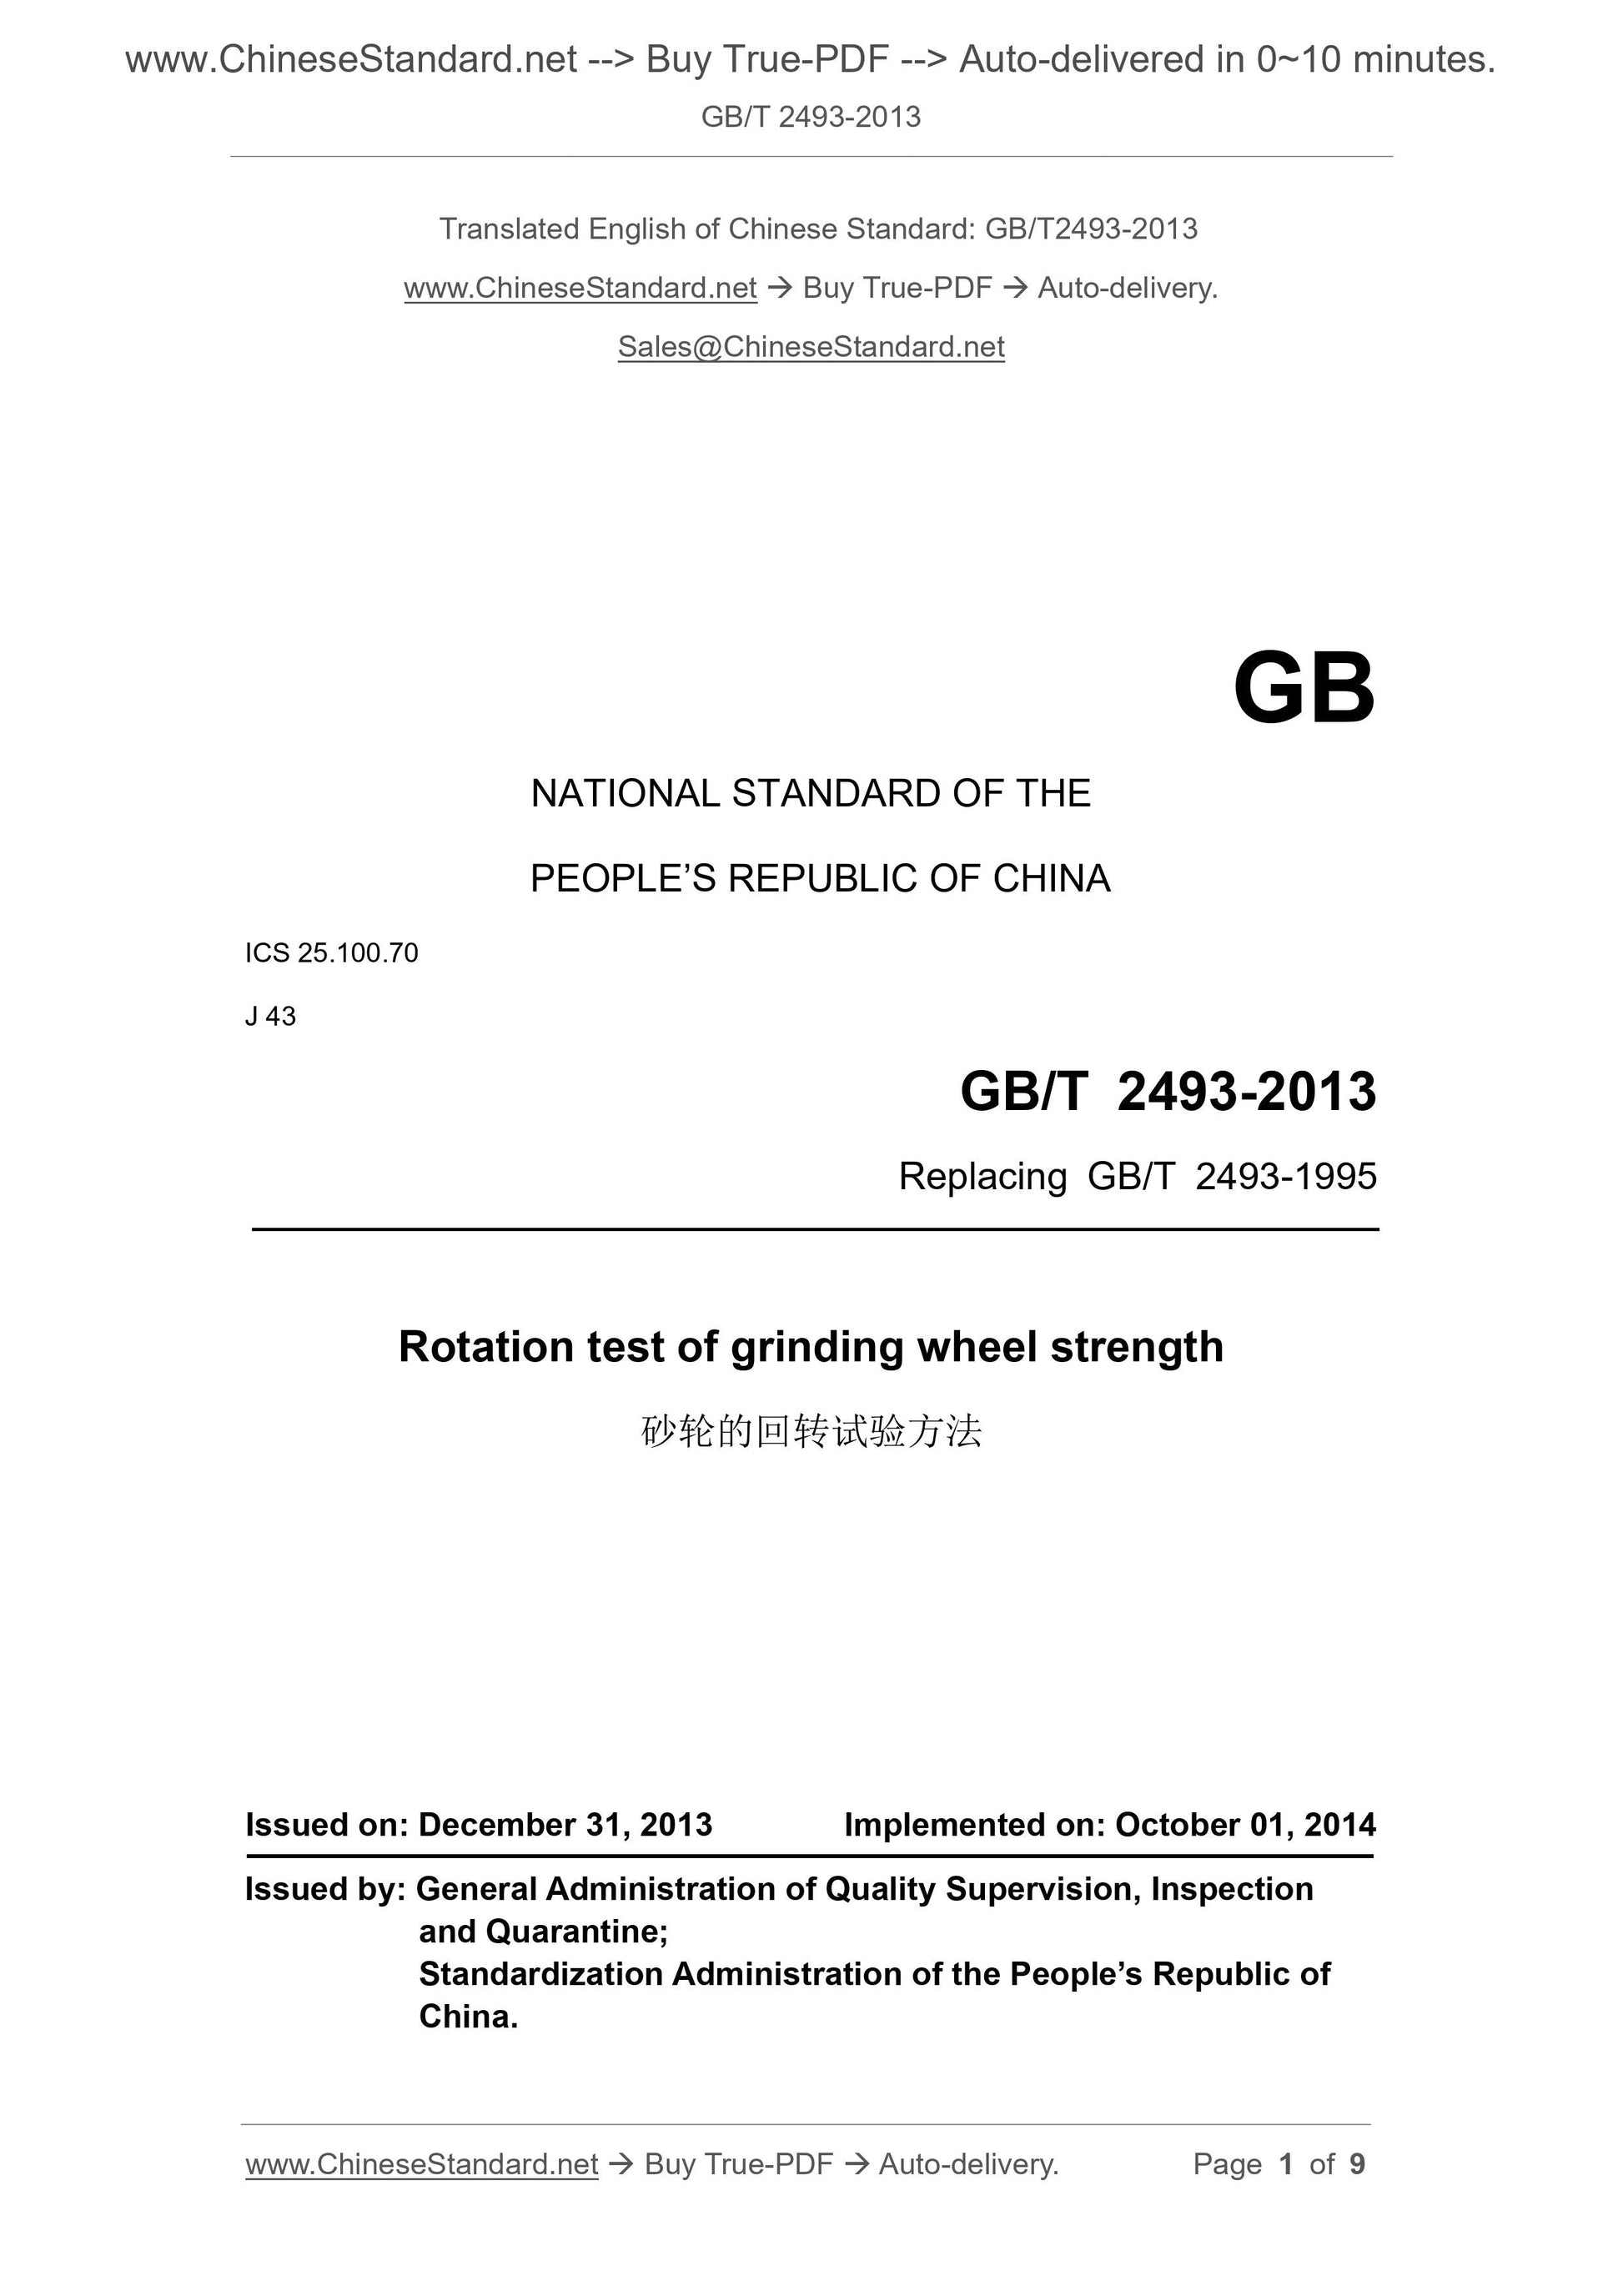 GB/T 2493-2013 Page 1